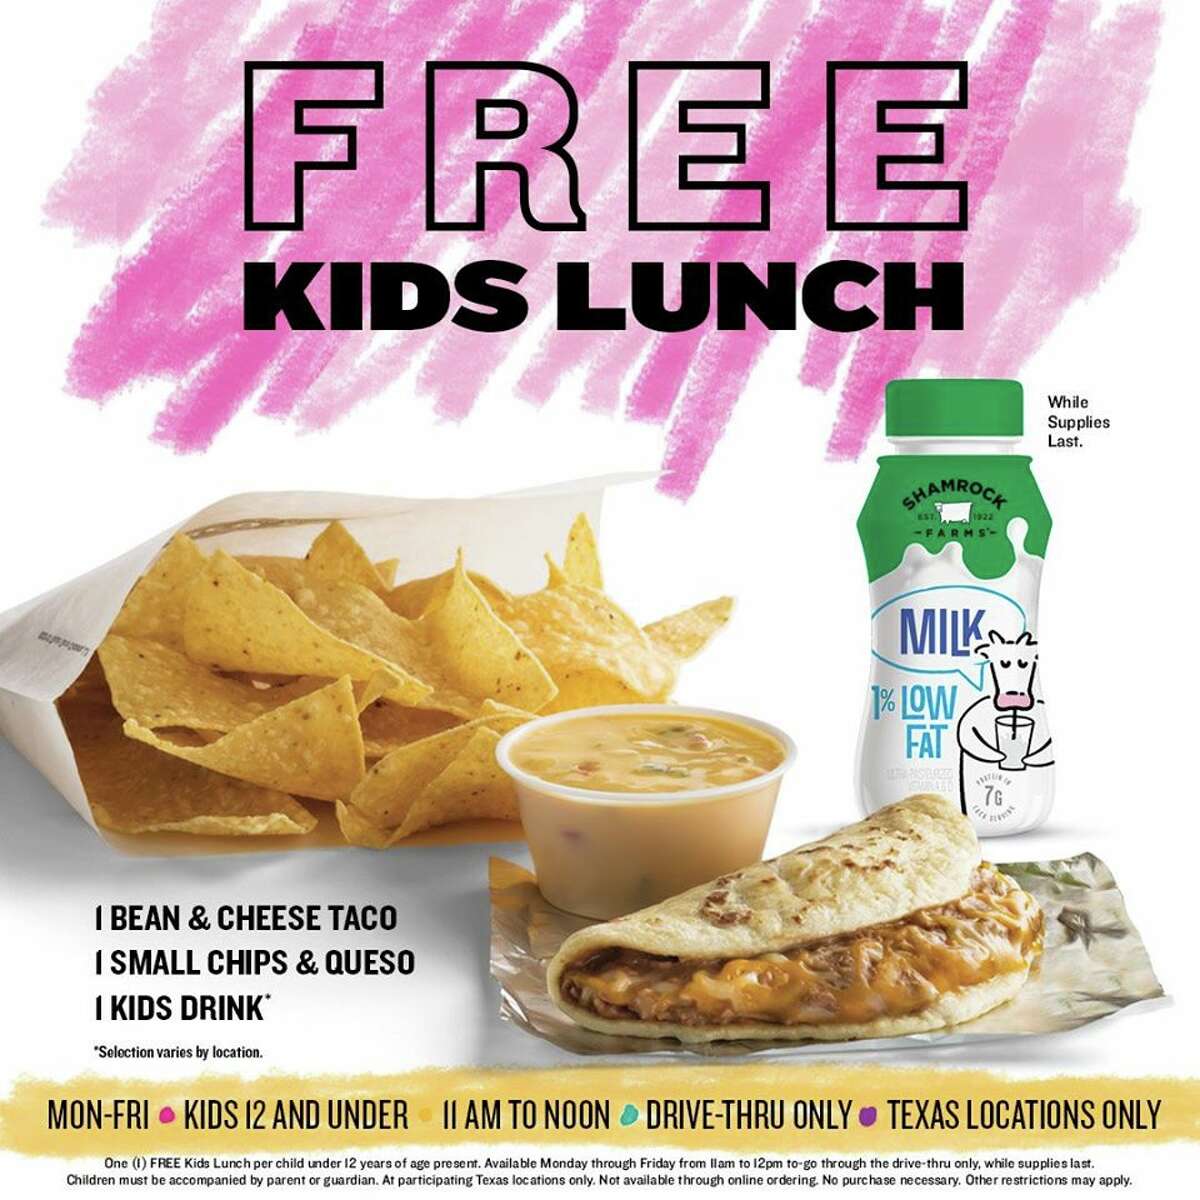 The chain Mexican restaurant's free meal offer includes a bean and cheese taco, chips and queso and a drink at all Texas locations from 11 a.m. to noon weekdays through the end of the summer for kids 12 and under.